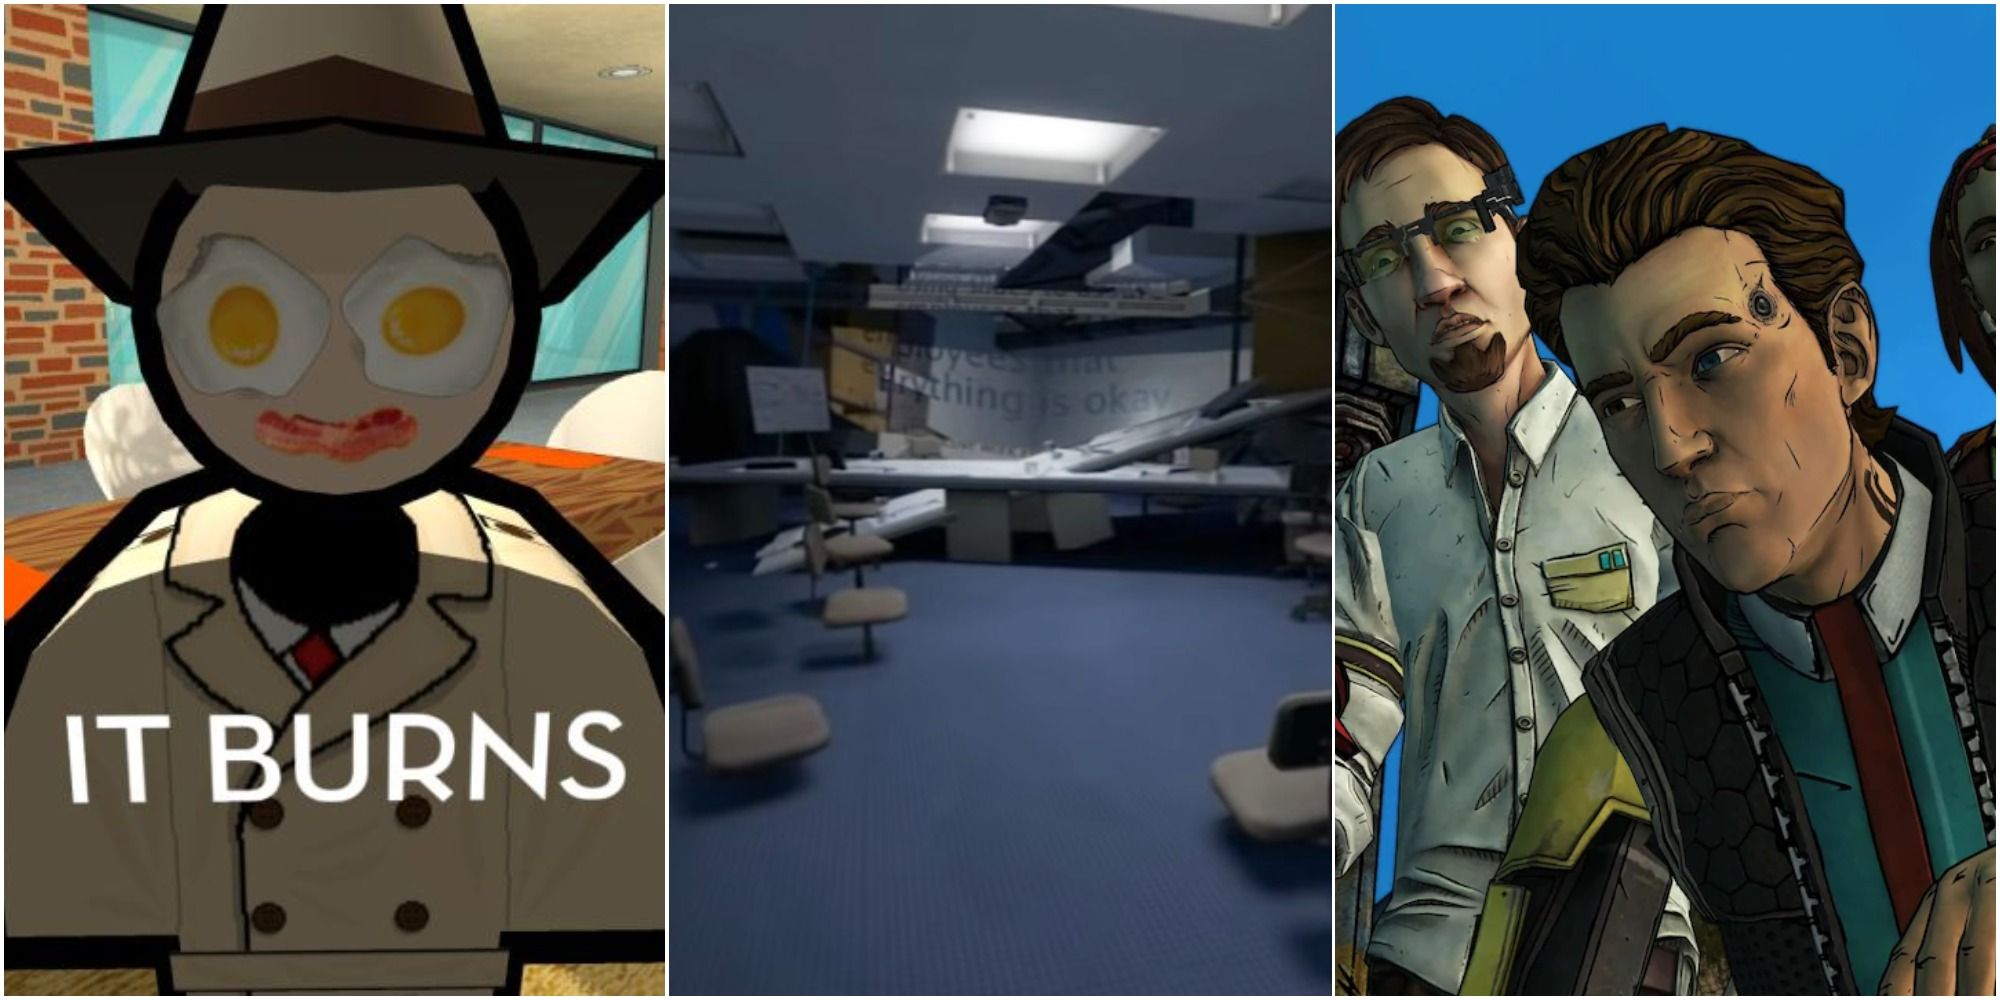 Eggs and bacon as a character's eyes and mouth in Jazzpunk - A destroyed office in The Stanley Parable - Rhys from Tales From The Borderlands